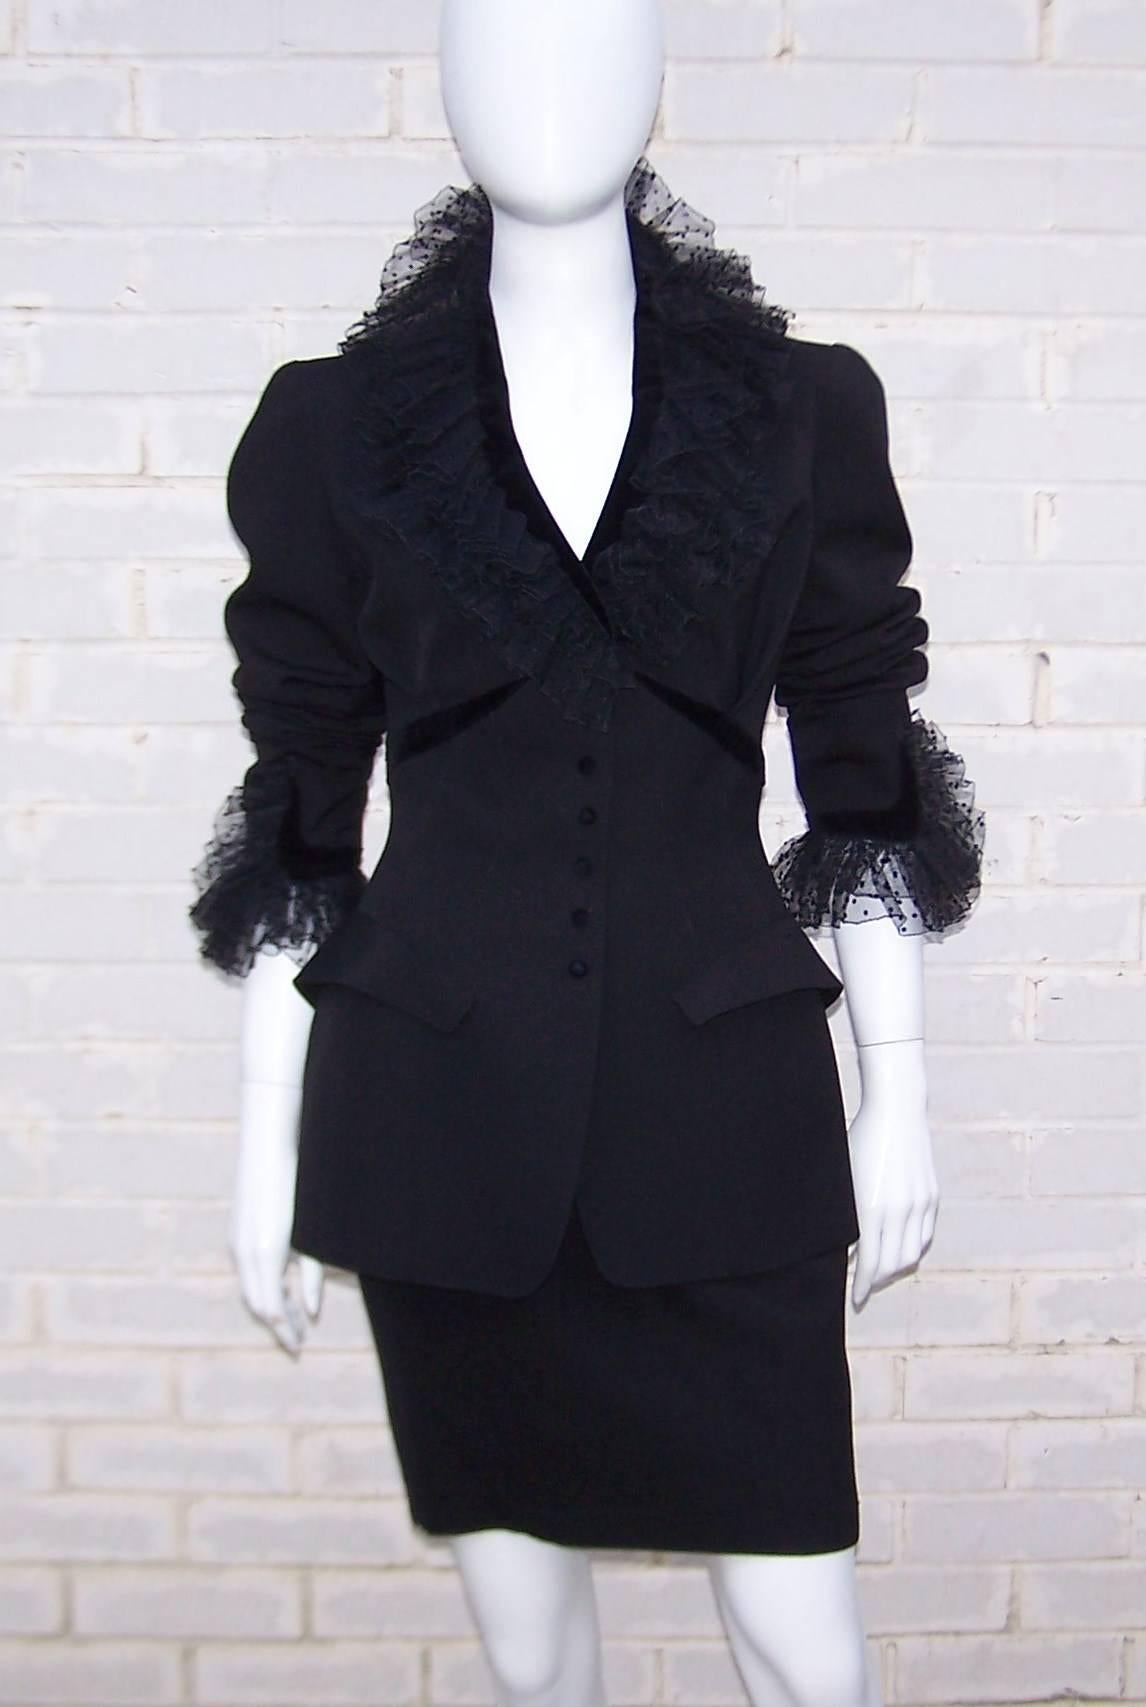 Oh the dramatic details are endless in this Thierry Mugler black jacket and skirt suit.  The strong 1980's influence is evident though there is a turn-of-the-century flavor to the details such as the dramatic dot netting at the collar and cuffs. 